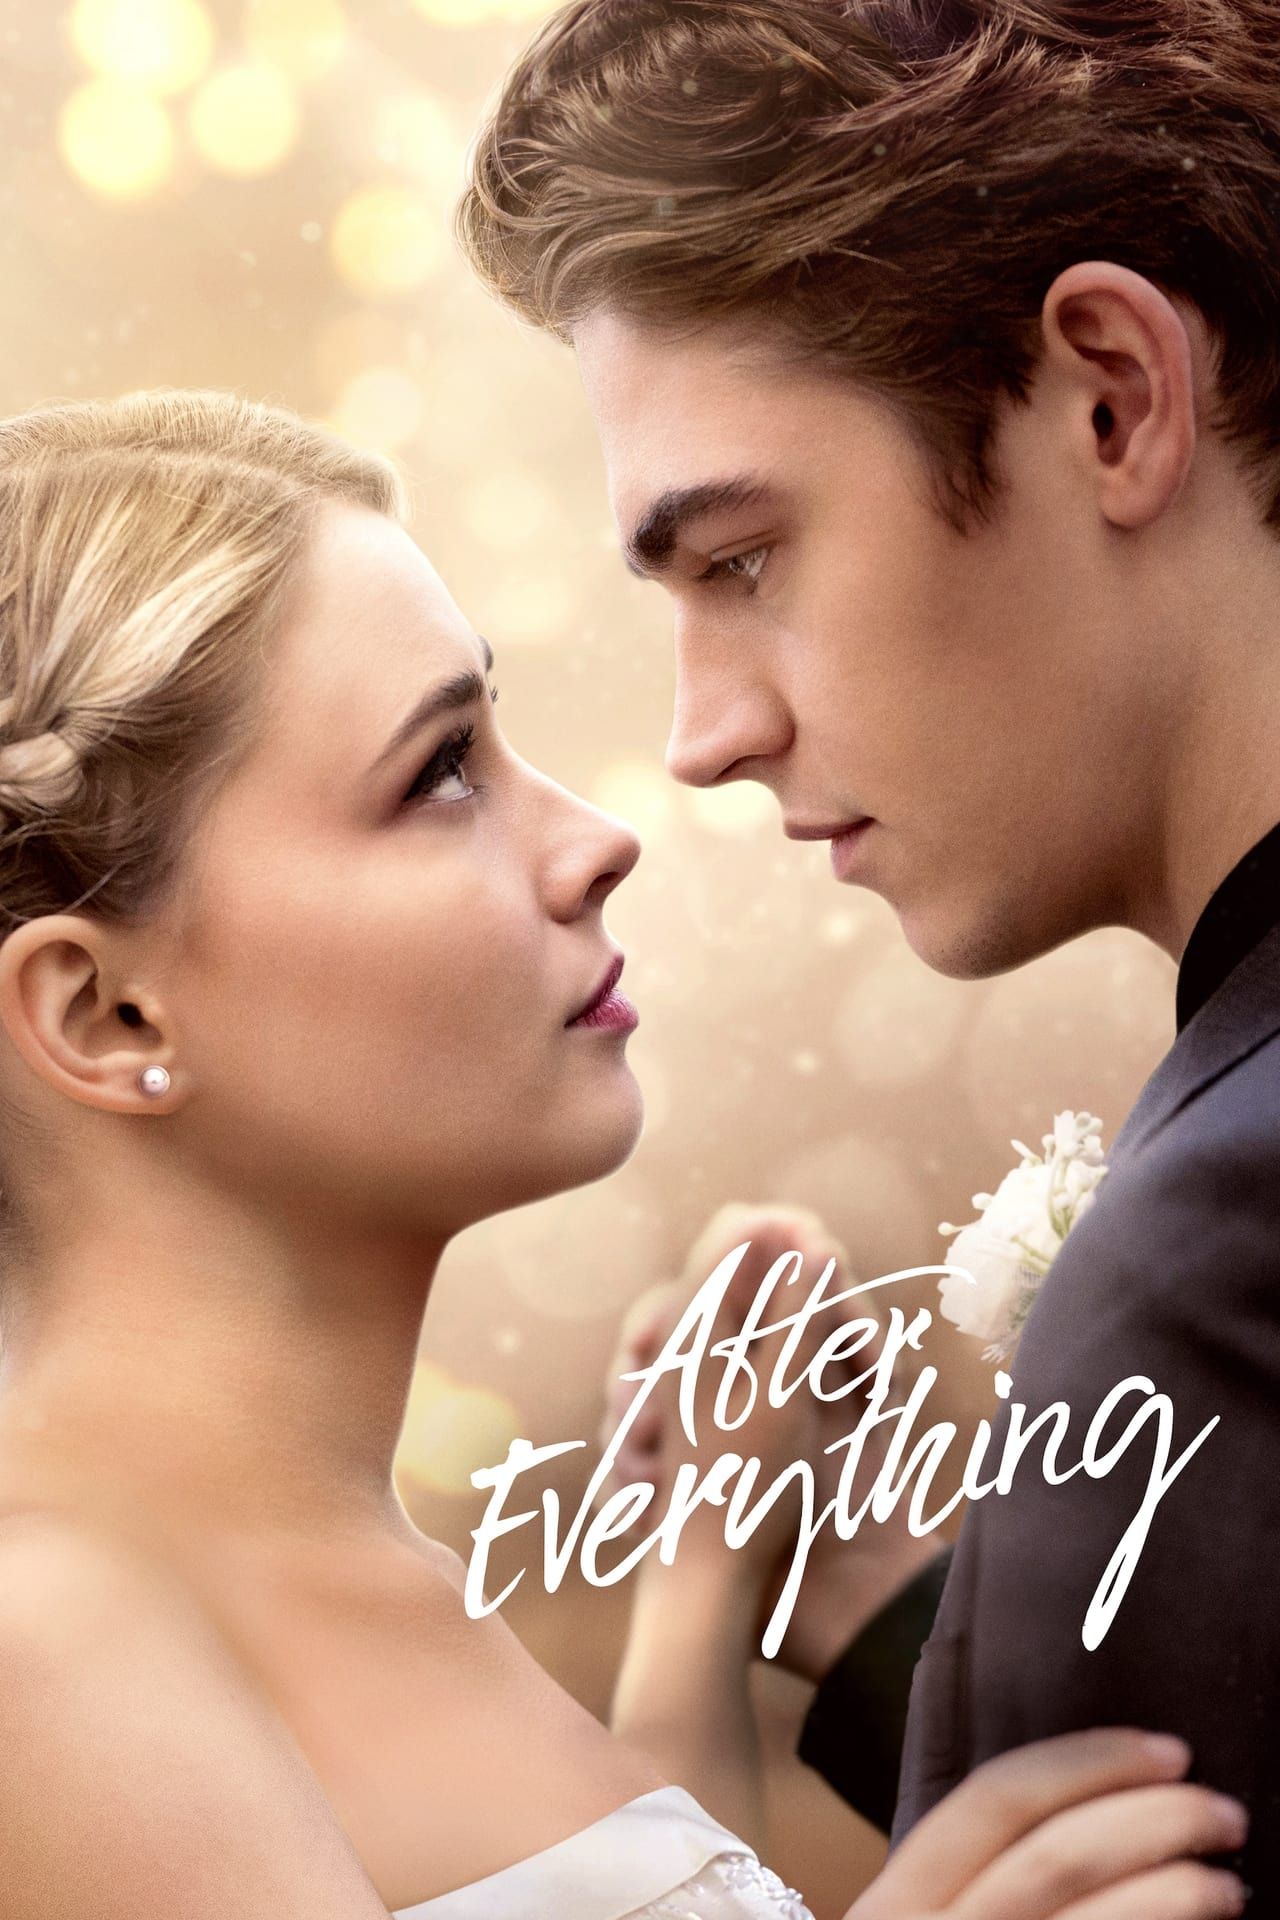 After Everything Movie Poster showing Hero Fiennes Tiffin as Hardin Scott and Josephgine Langford as Tessa Young Holding hands and looking into each others eyes